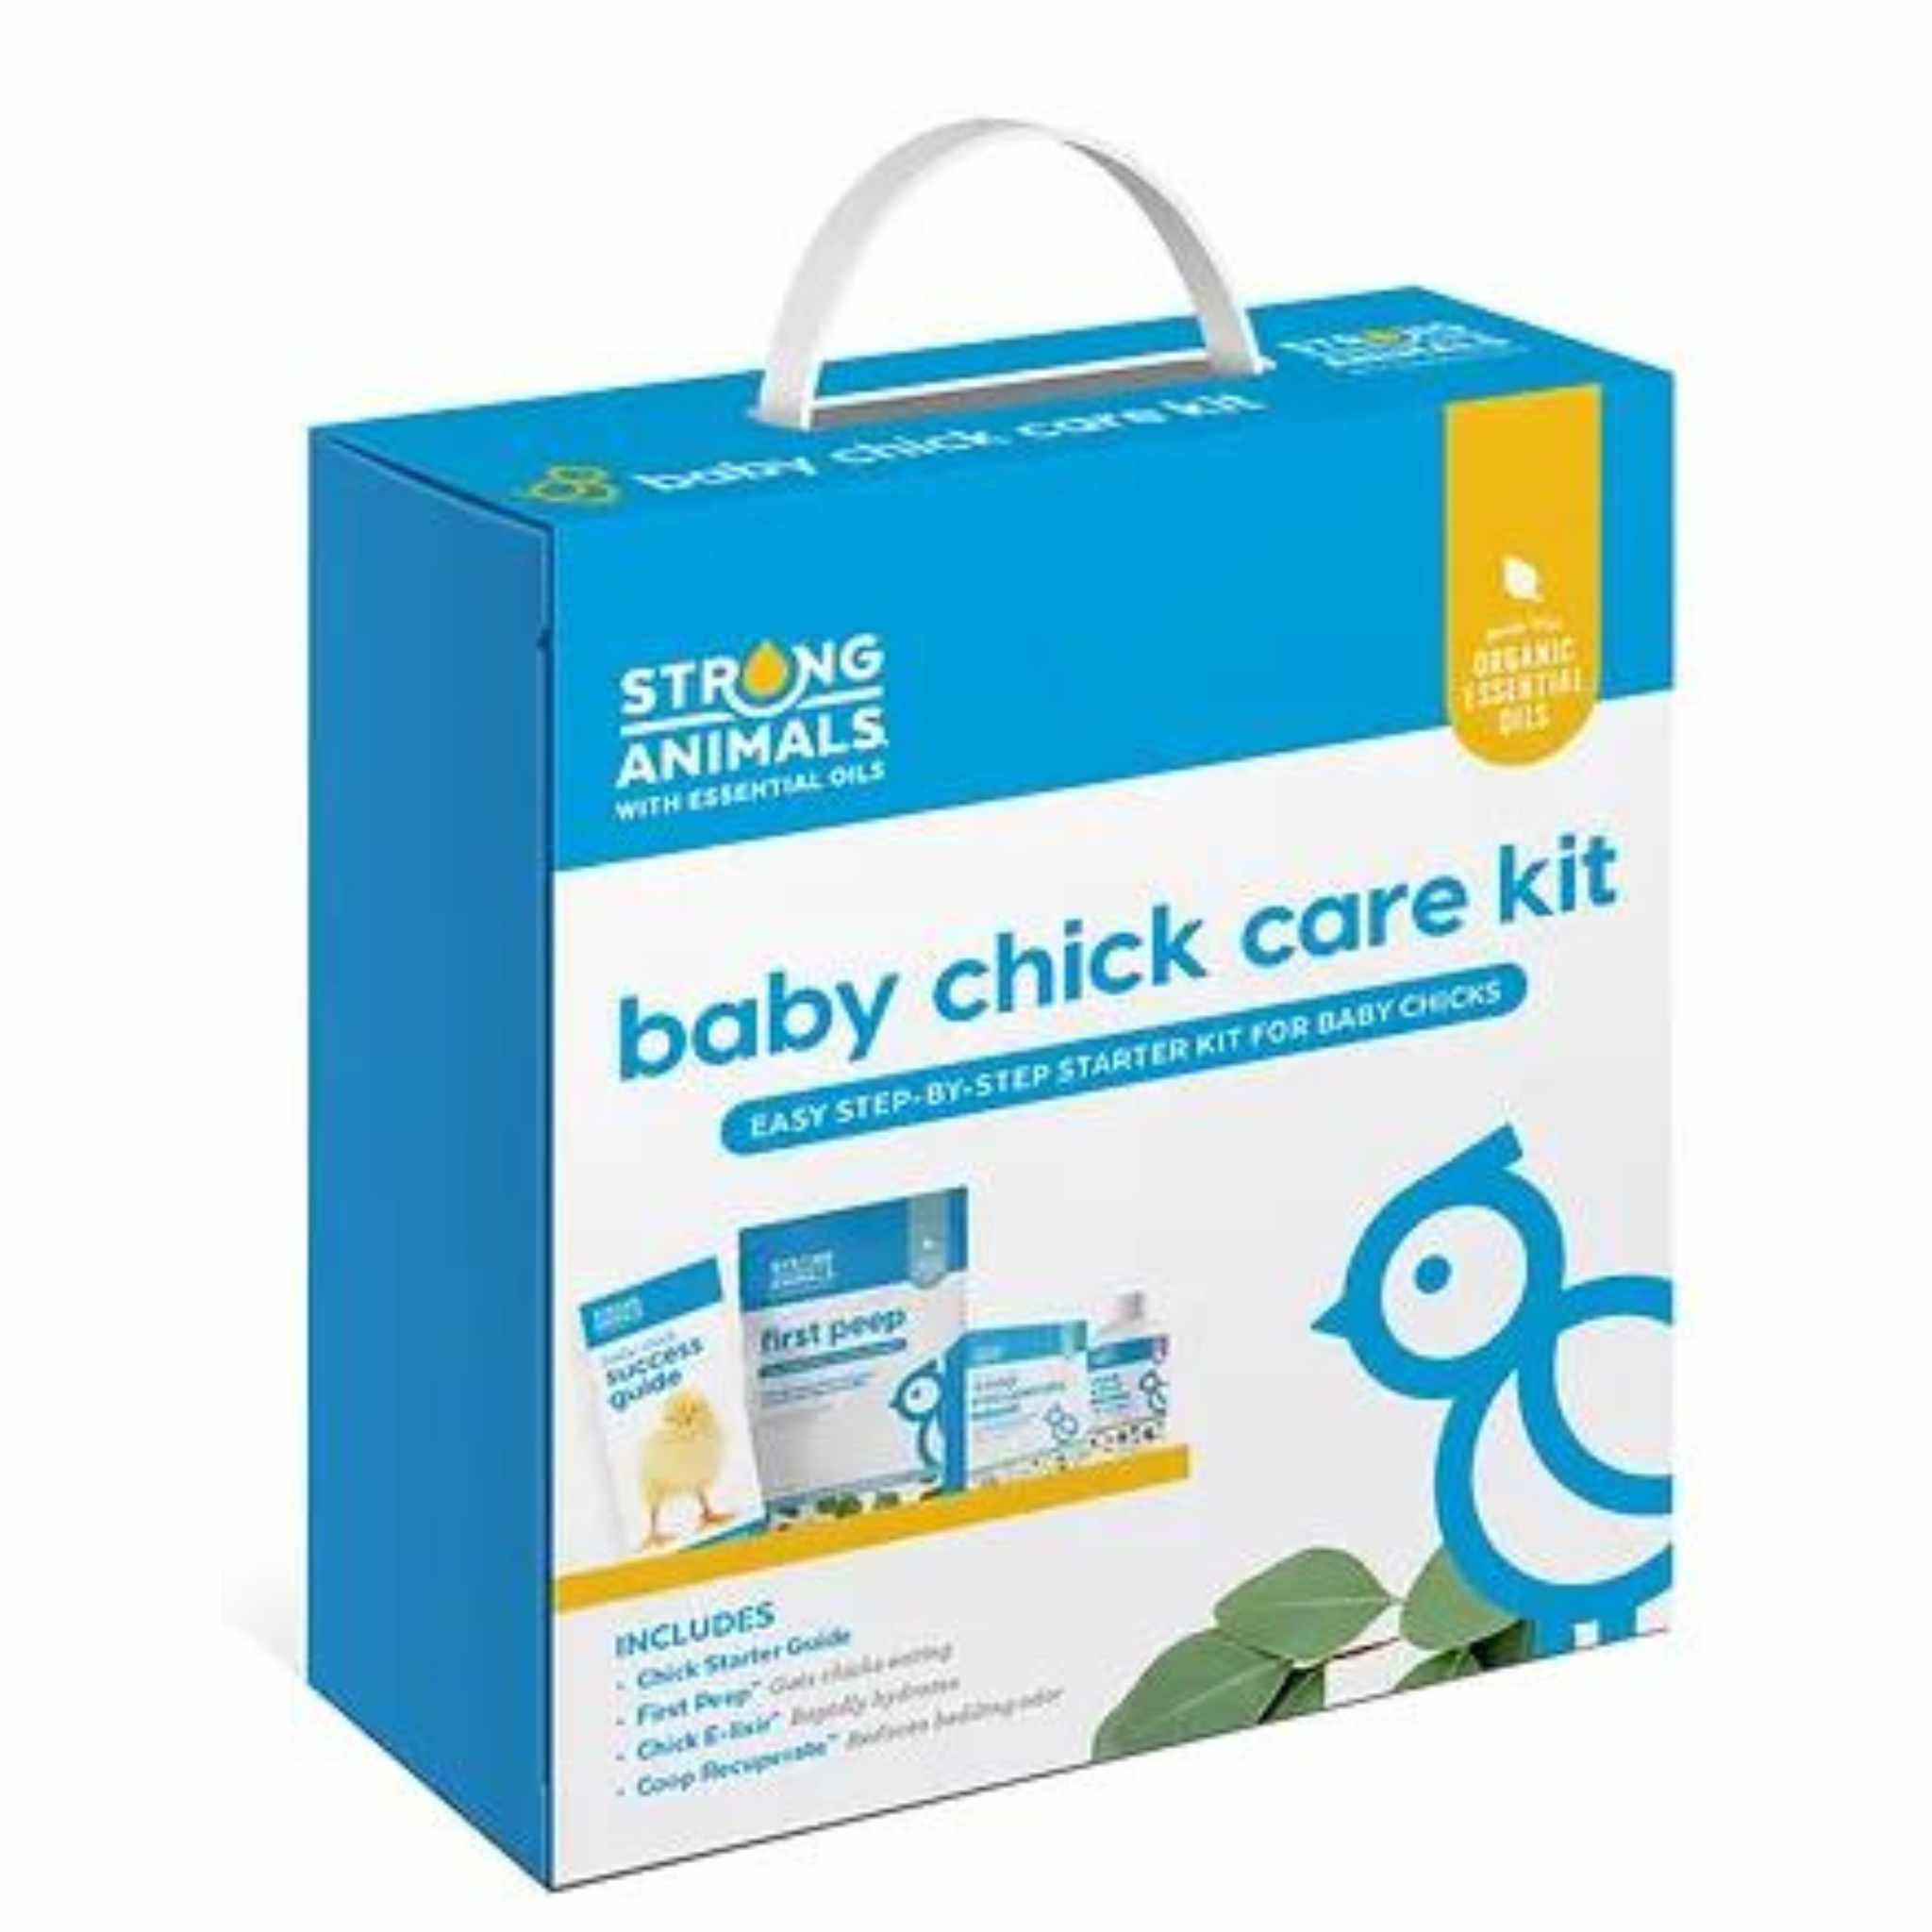 Hatching Time Strong Animals. Baby chick care kit can be seen in image. Step-by-step starter kit for baby chicks.